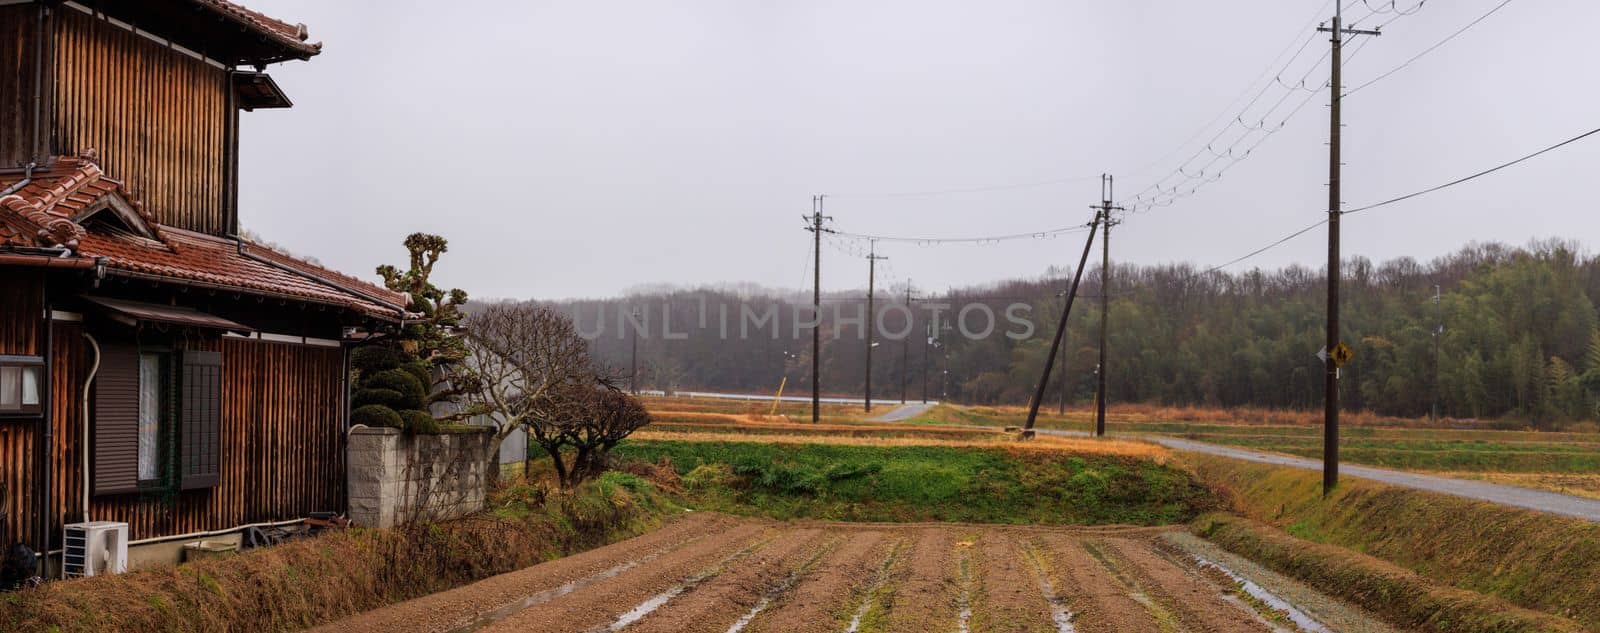 Old Wooden Japanese House by Small Rice Field and Country Road on Cloudy Day by Osaze